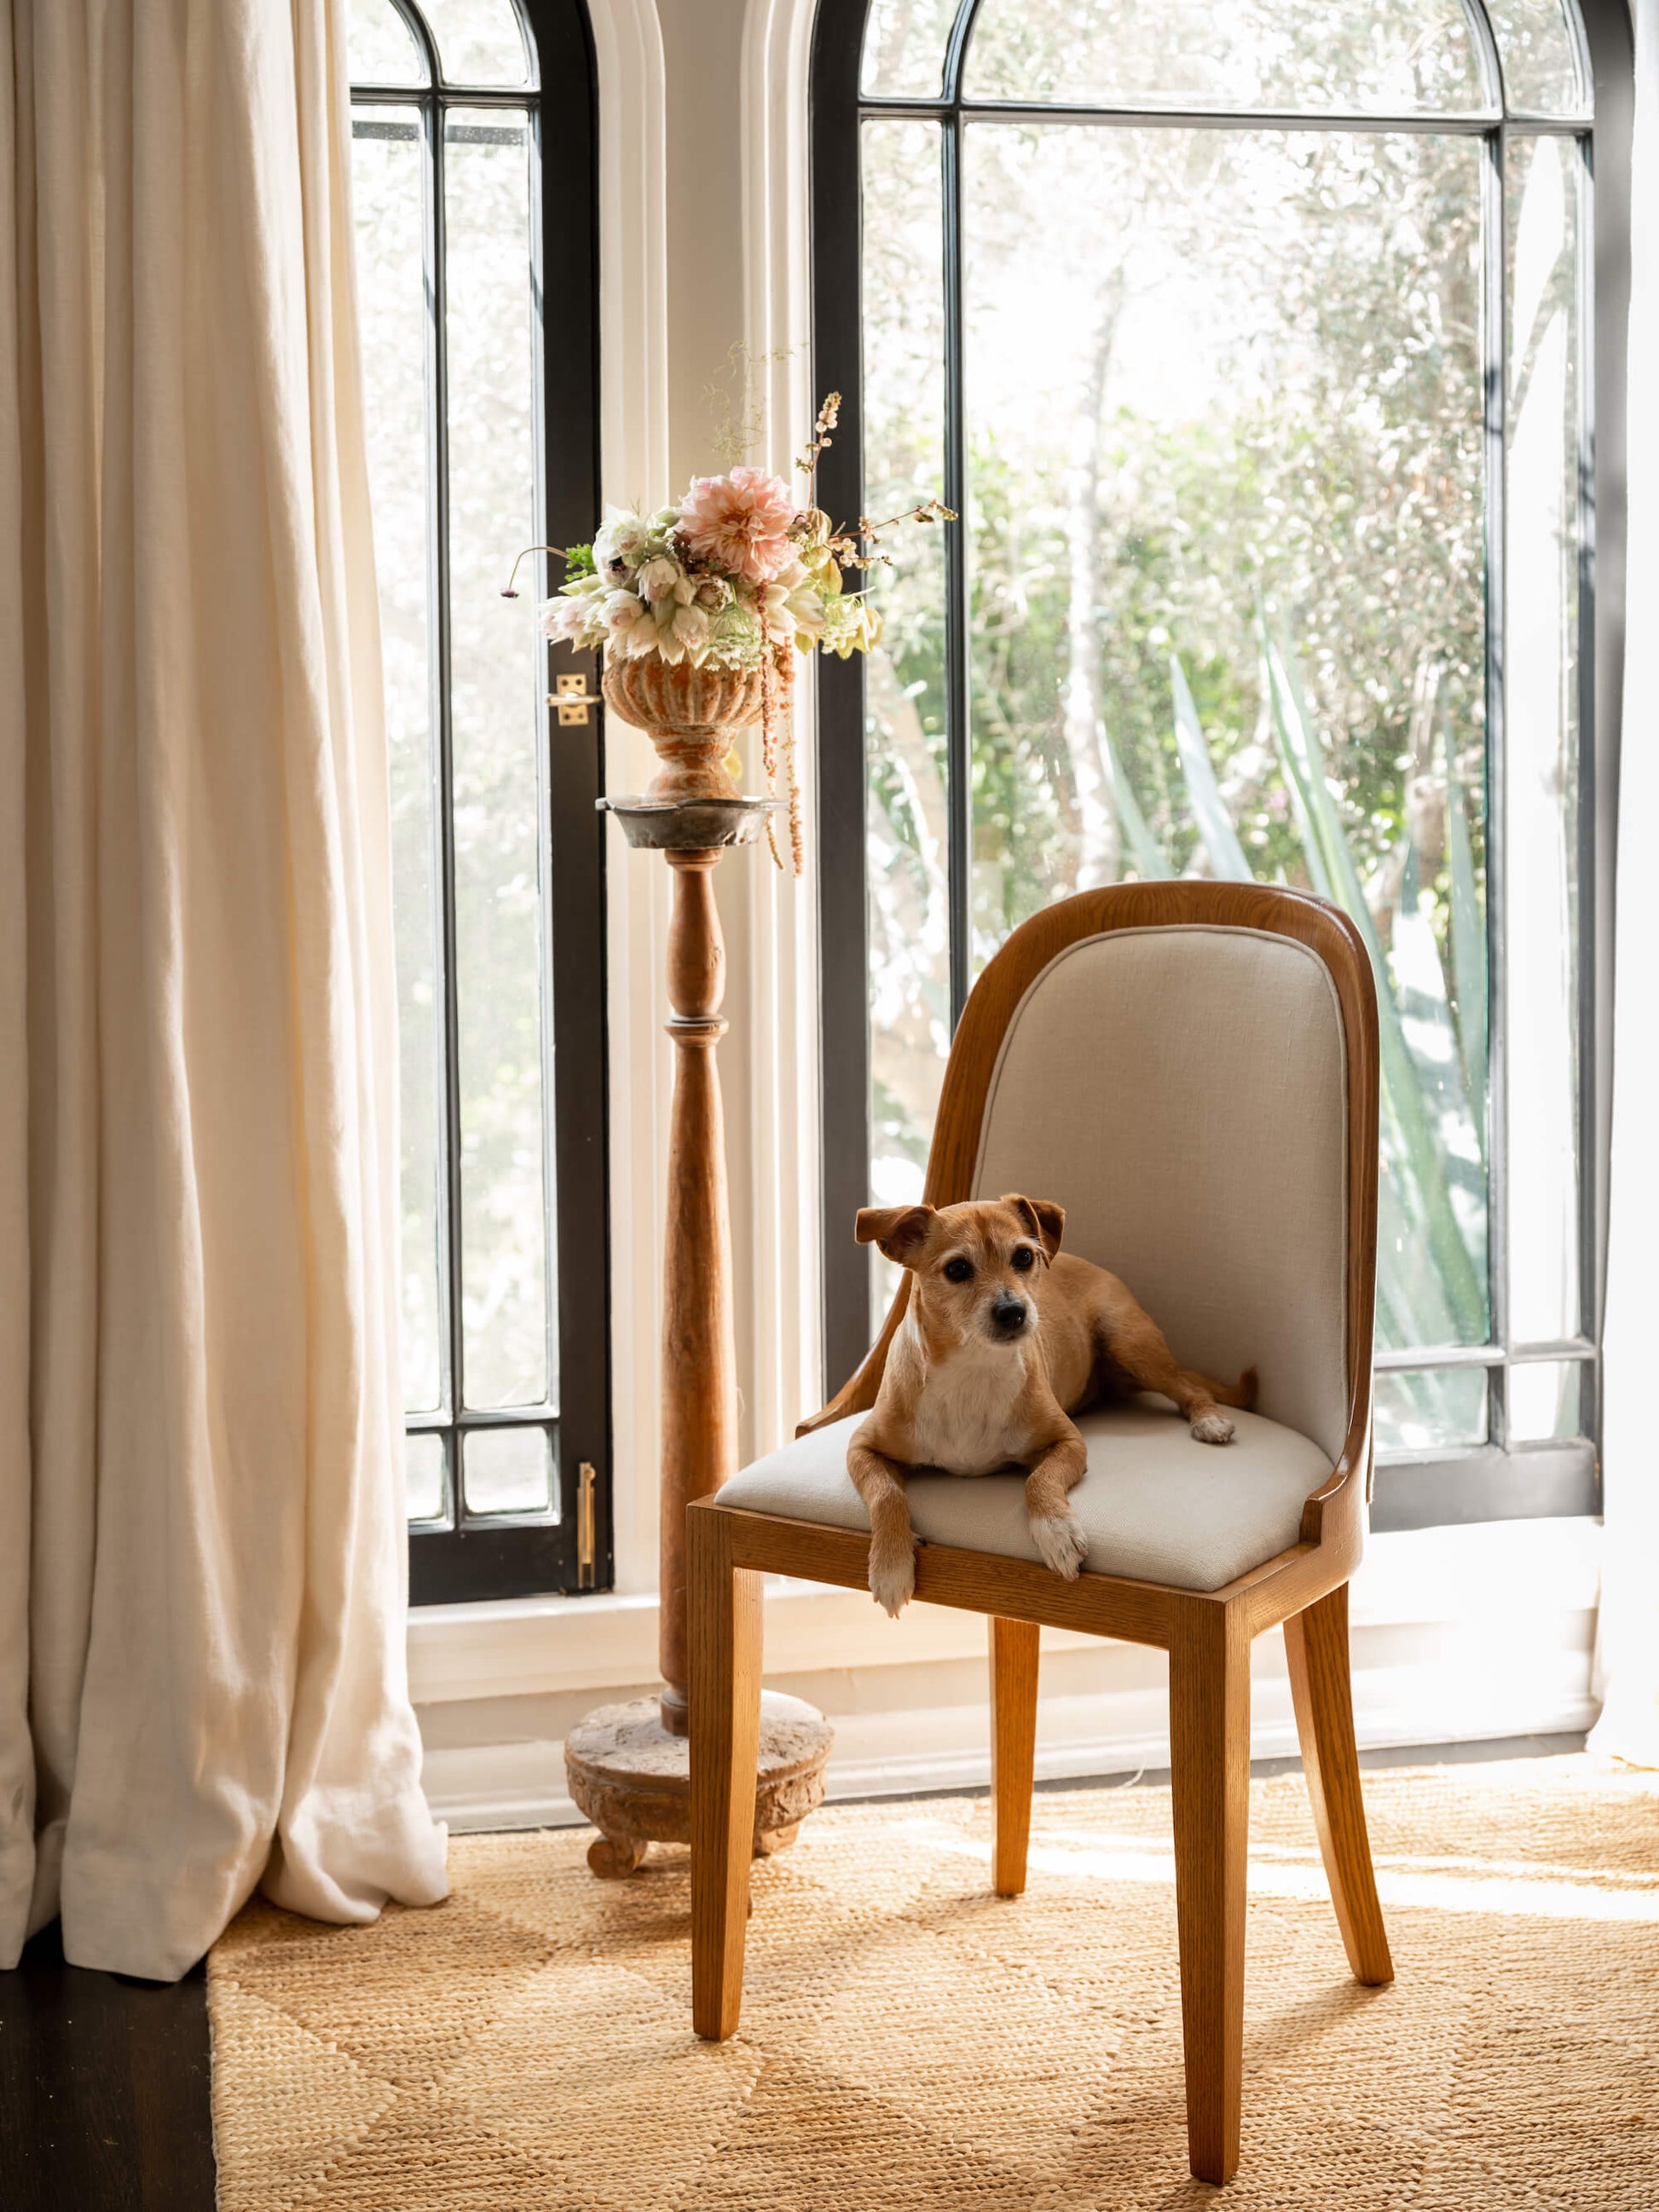 Dining chair with dog sitting on the seat